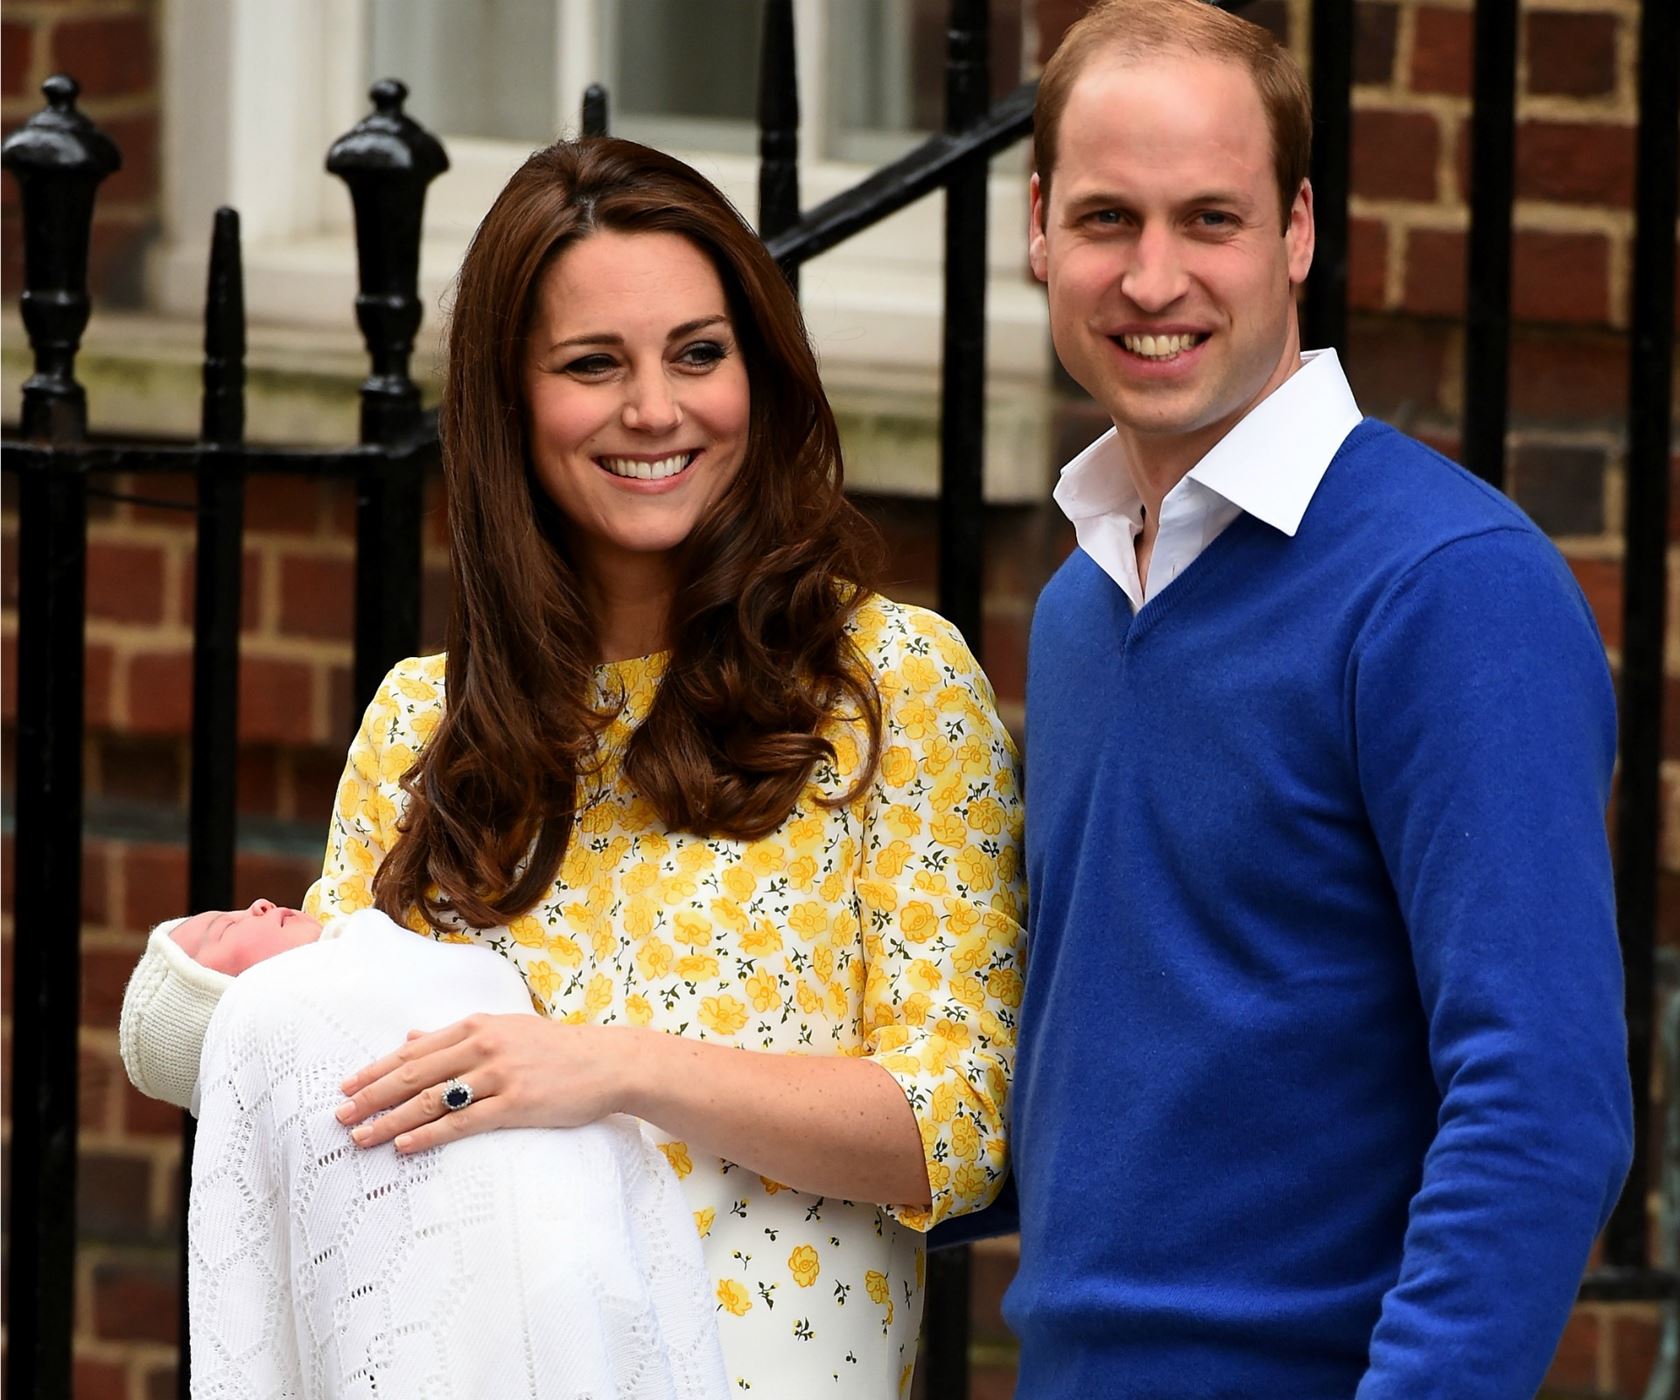 Kate Middleton with Princess Charlotte and Prince William